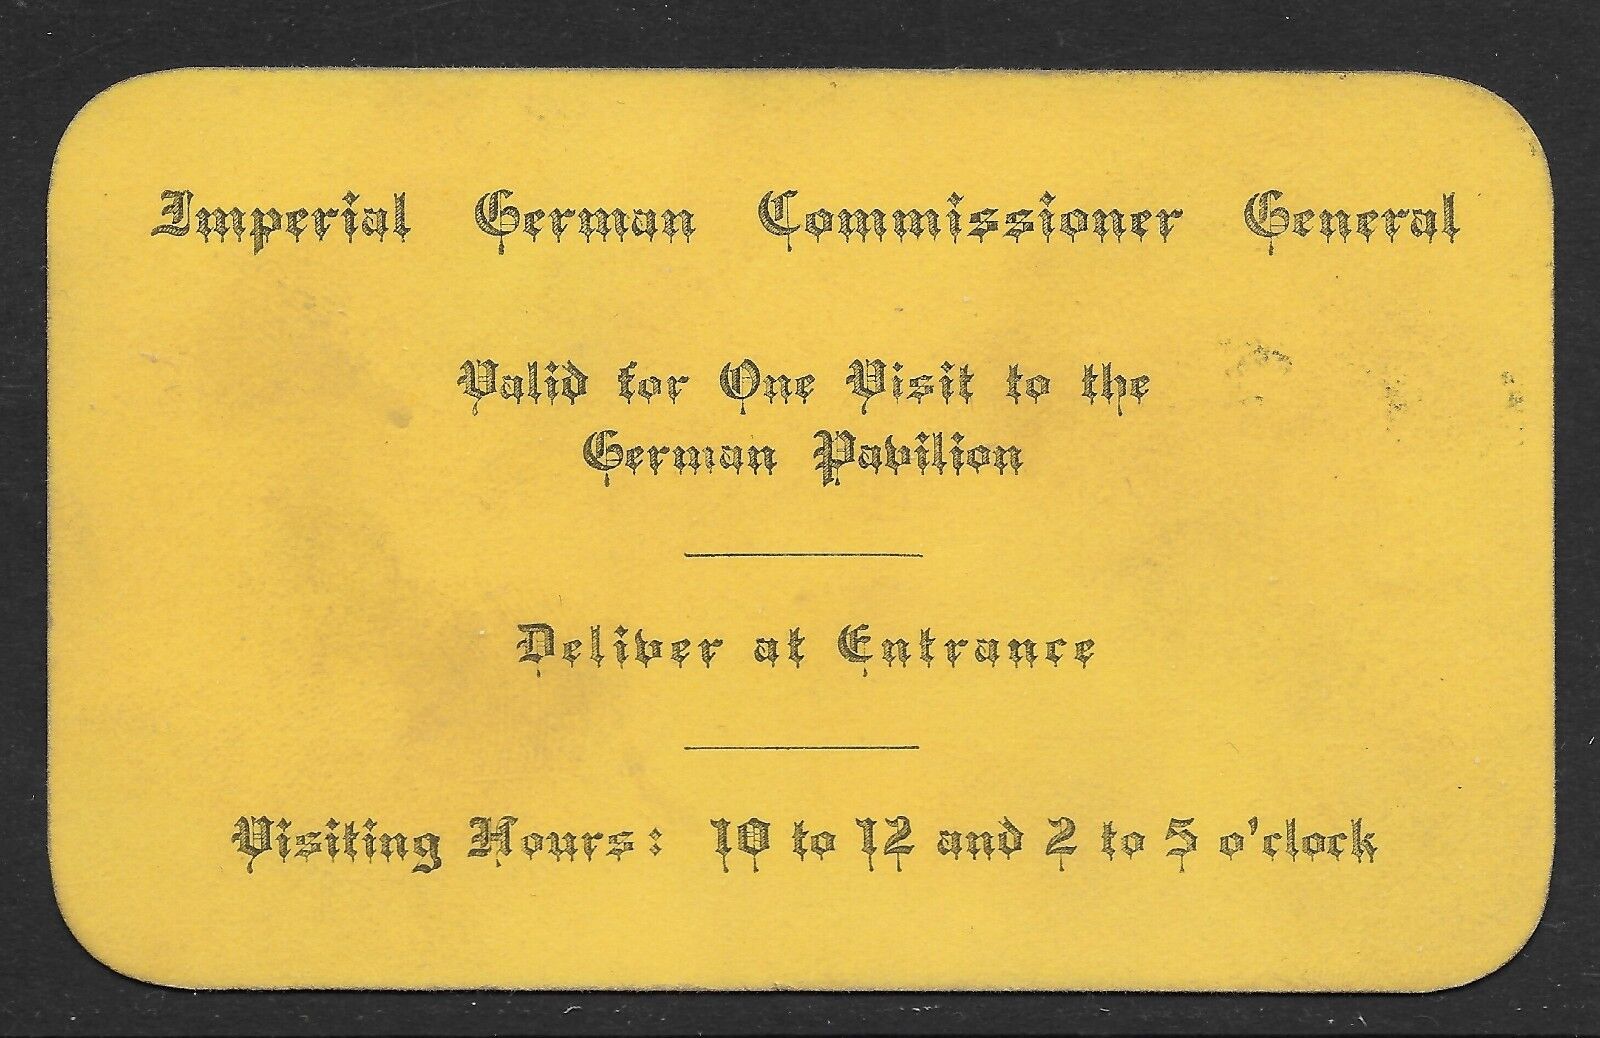 Louisiana Purchase Exposition - Pass for Imperial German Commissioner General